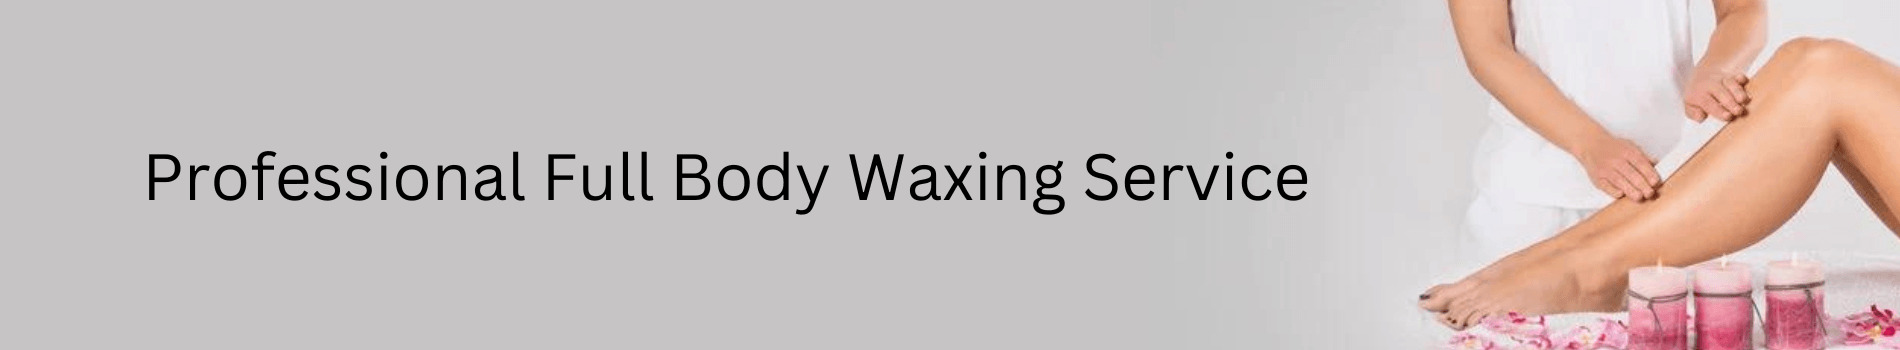  full body waxing service at home near me